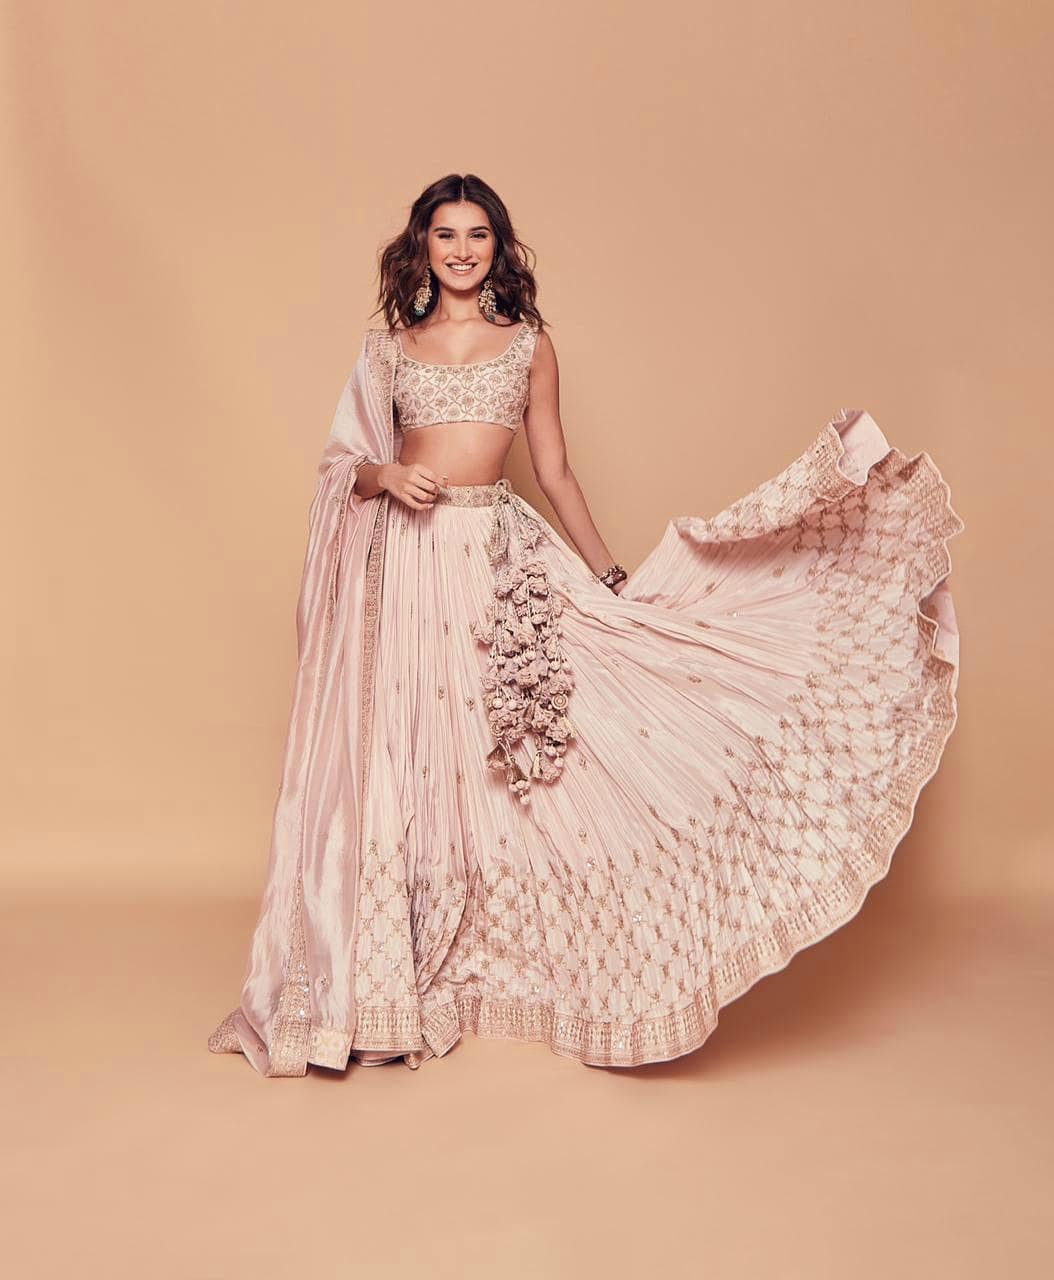 Tara Sutaria is a sight to behold in the pastel pink lehenga